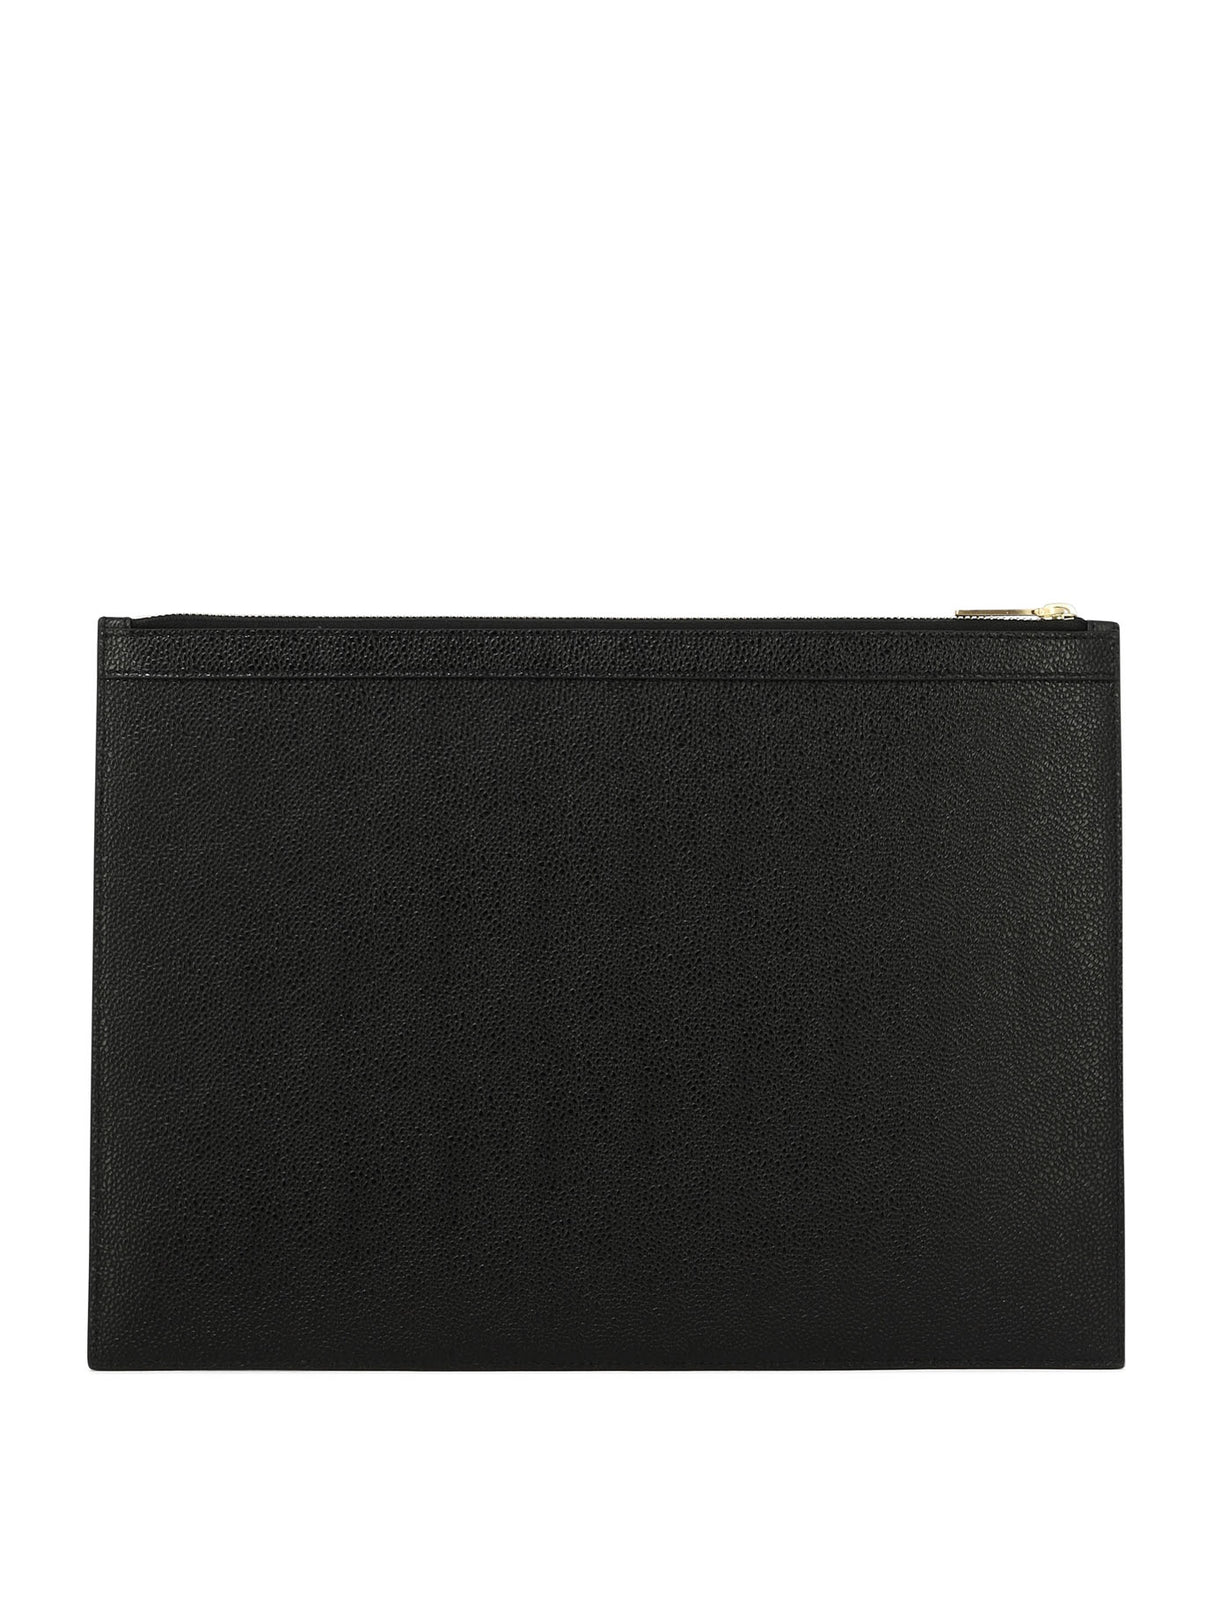 THOM BROWNE Sleek and Sophisticated Black Leather Document Holder for Men